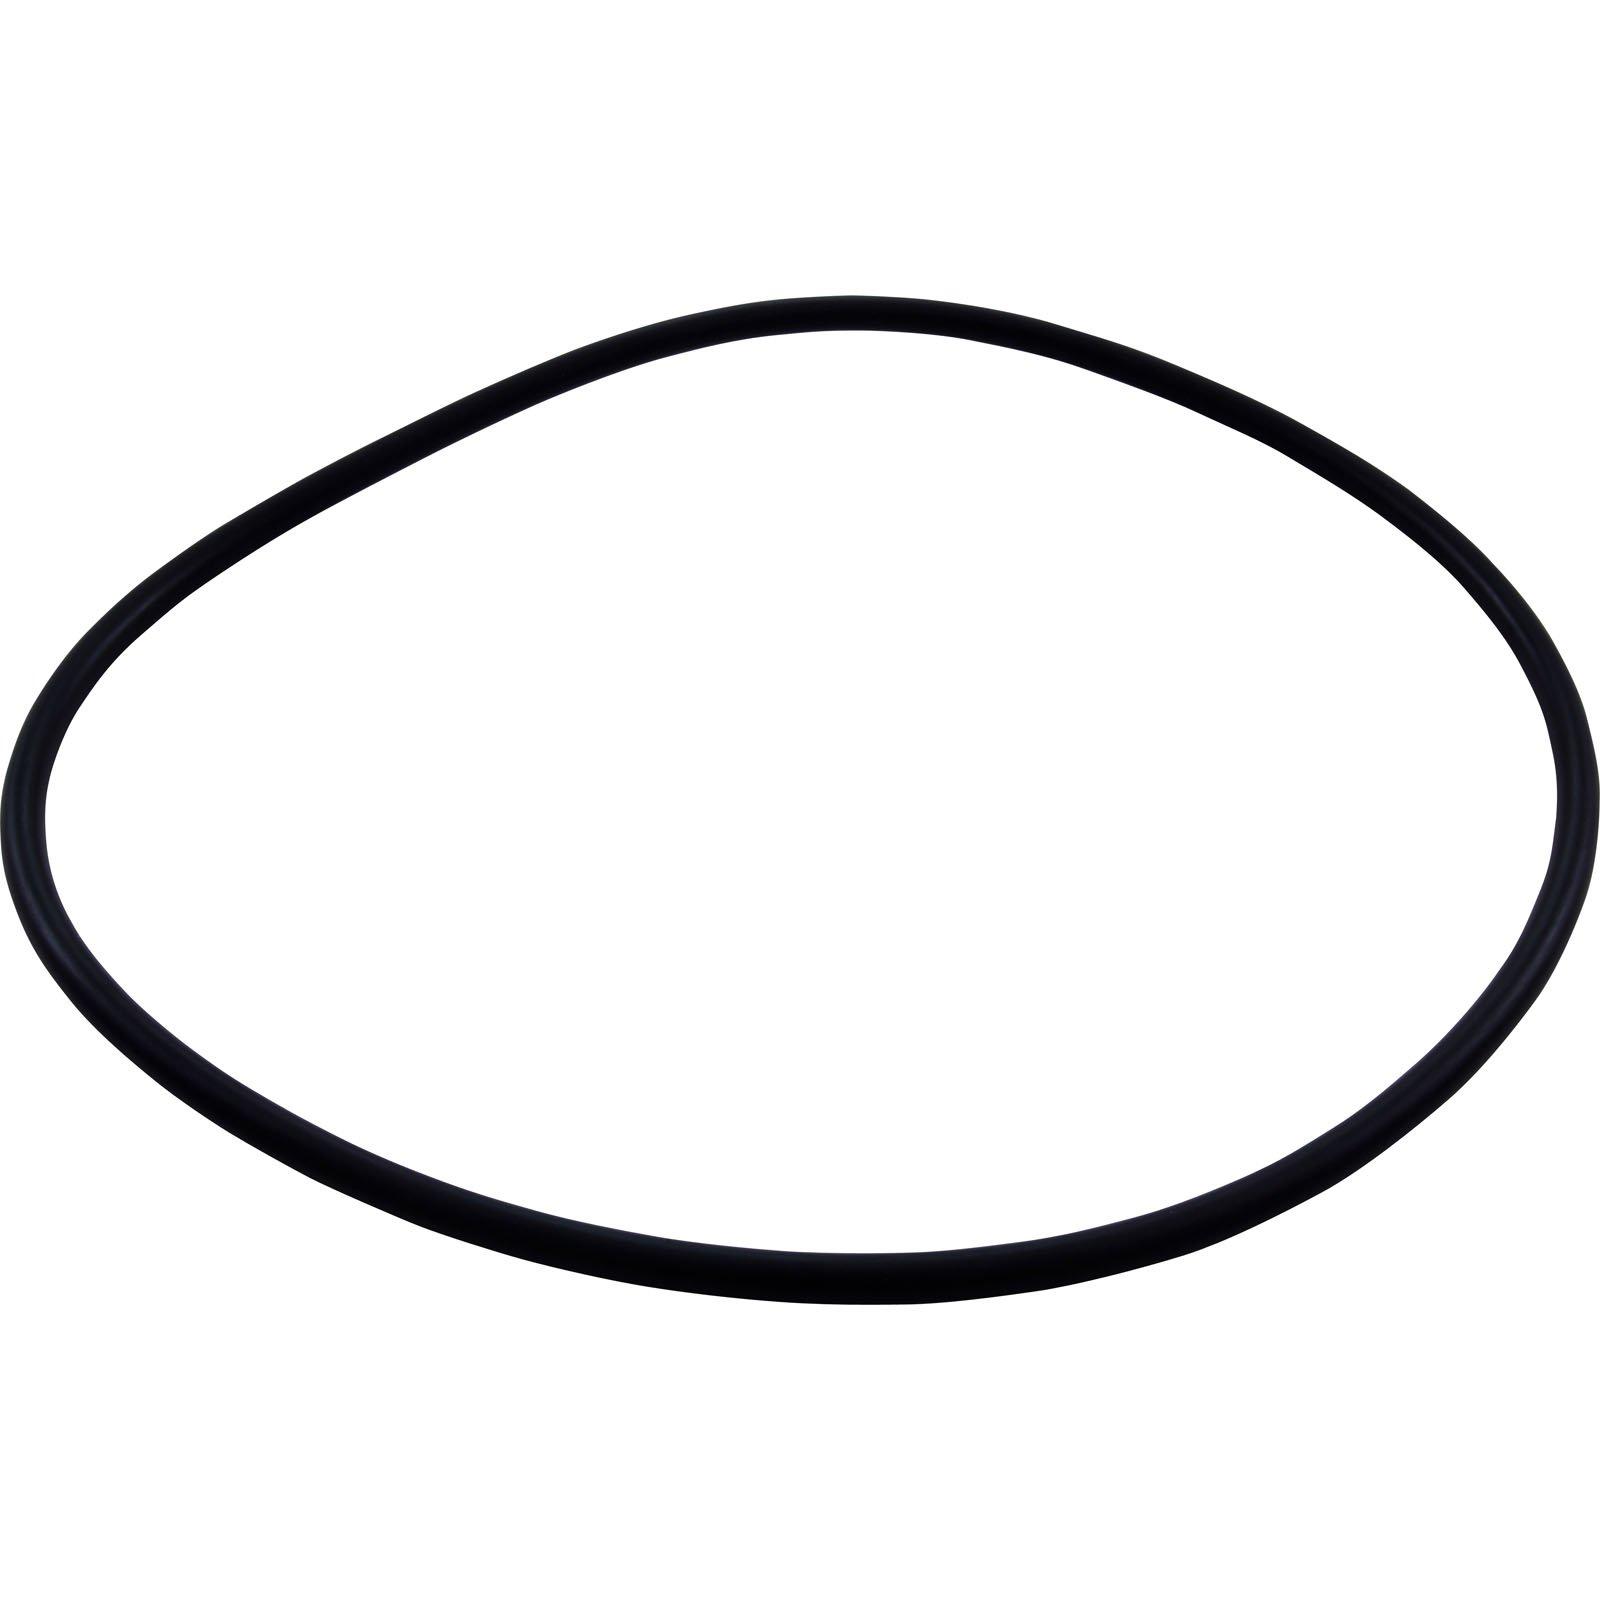 All Seals - Replacement O-Ring for Jacuzzi JCA Body, 9-1/2in. OD